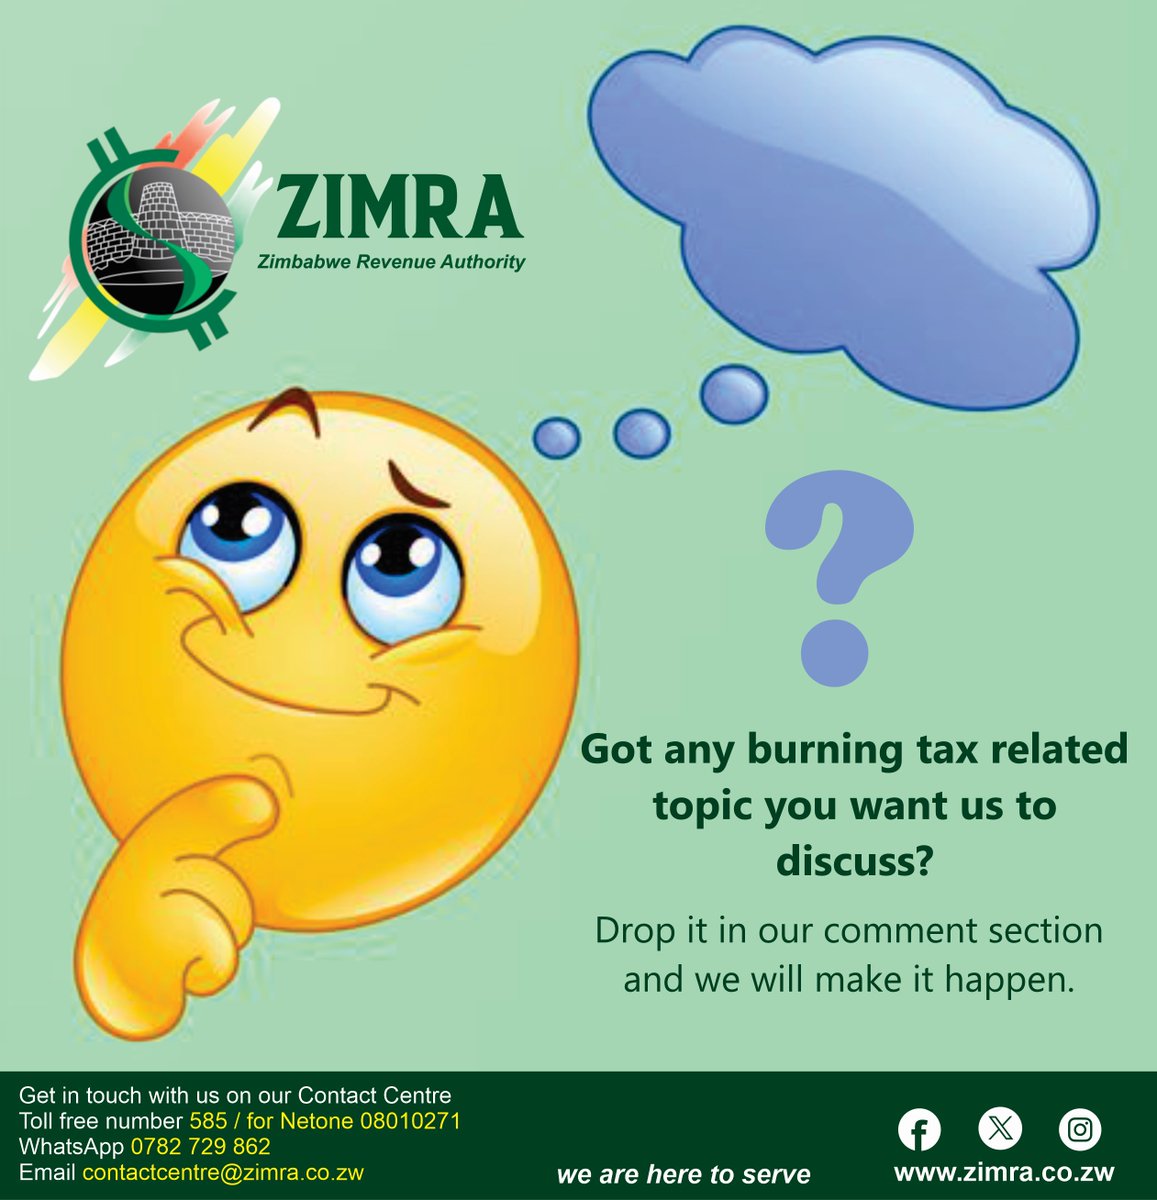 Do you have any burning tax related topic you want us to  discuss? Drop it in our comment section
and we will make it happen. #TaxEducation #ZIMRA #WeAreHereToServe.